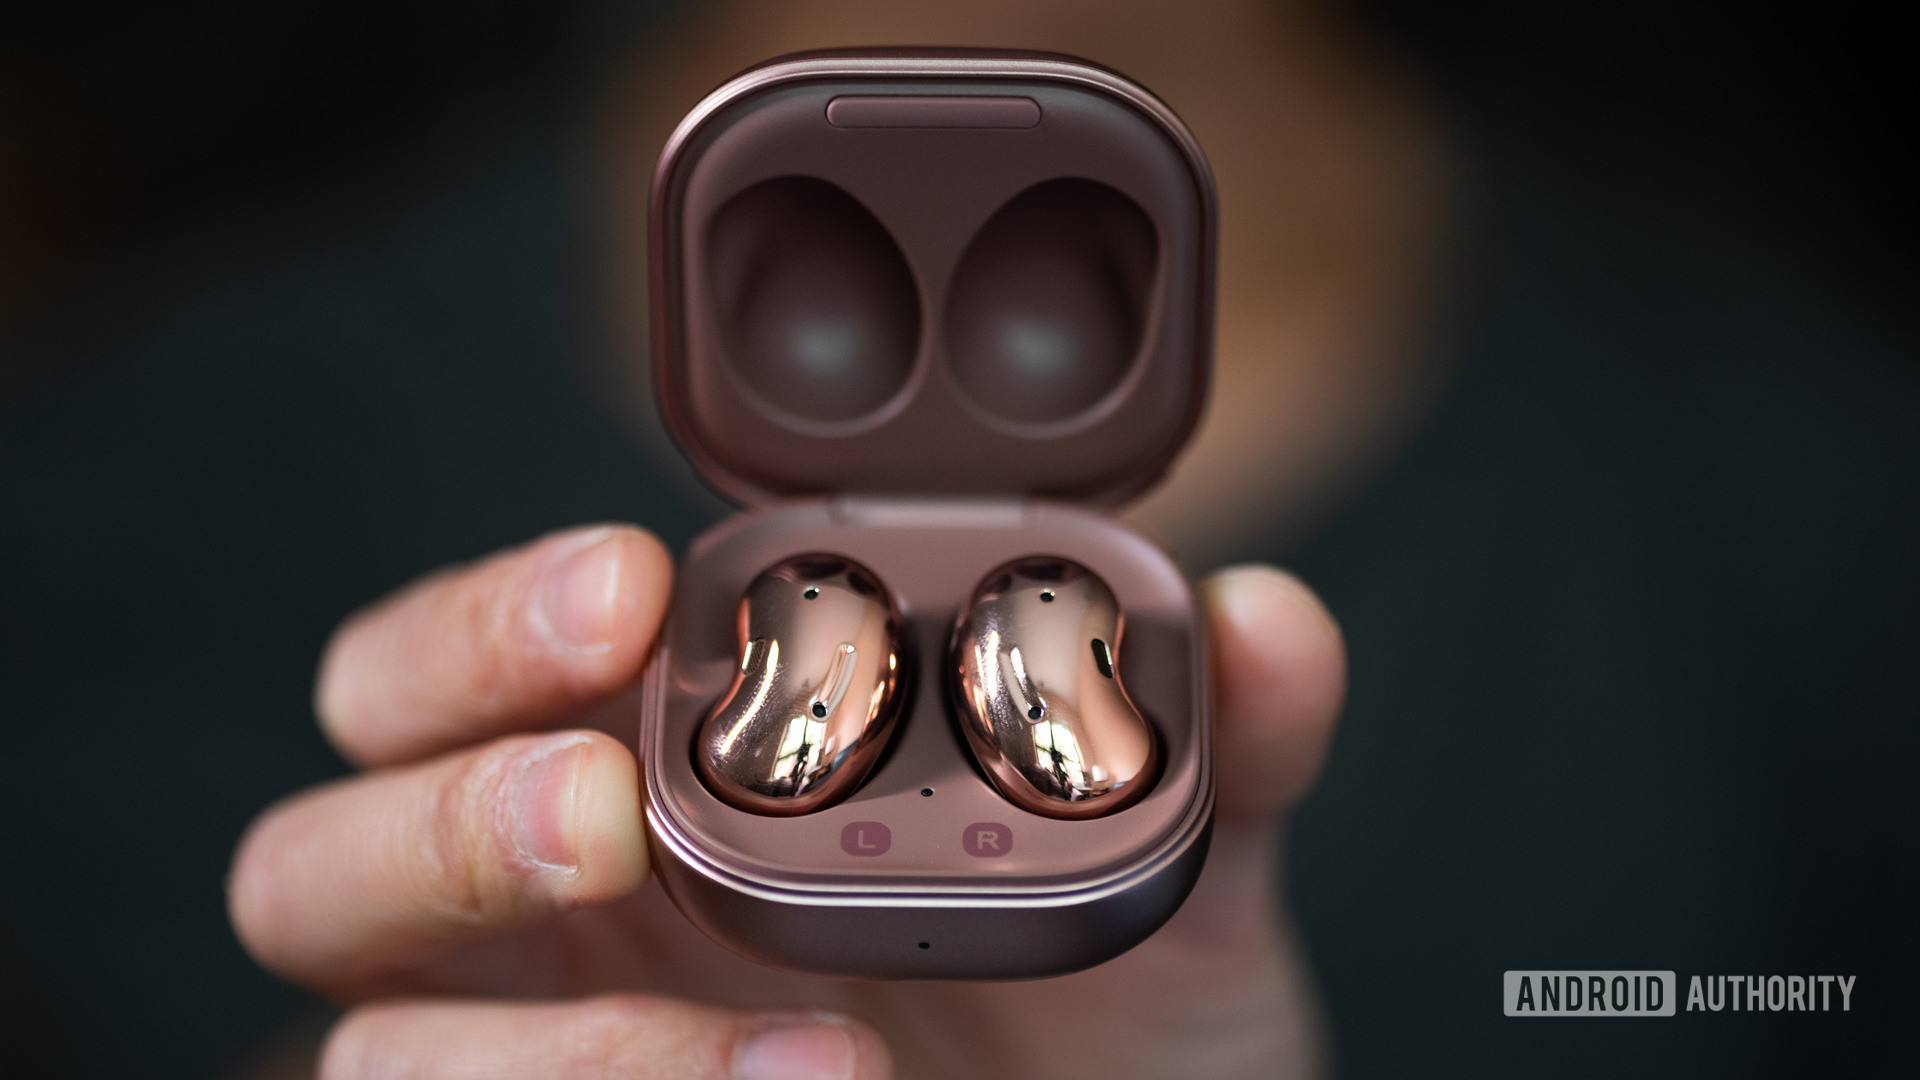 The Samsung Galaxy Buds Live noise cancelling true wireless earbuds in the case being held in a hand.